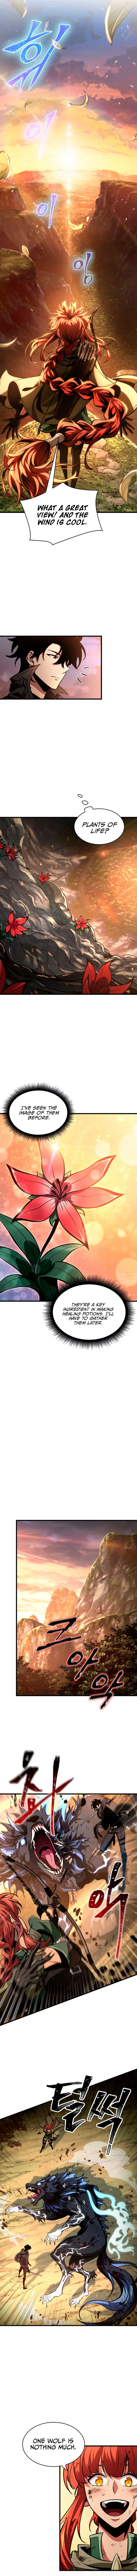 Pick Me Up Chapter 14 page 5